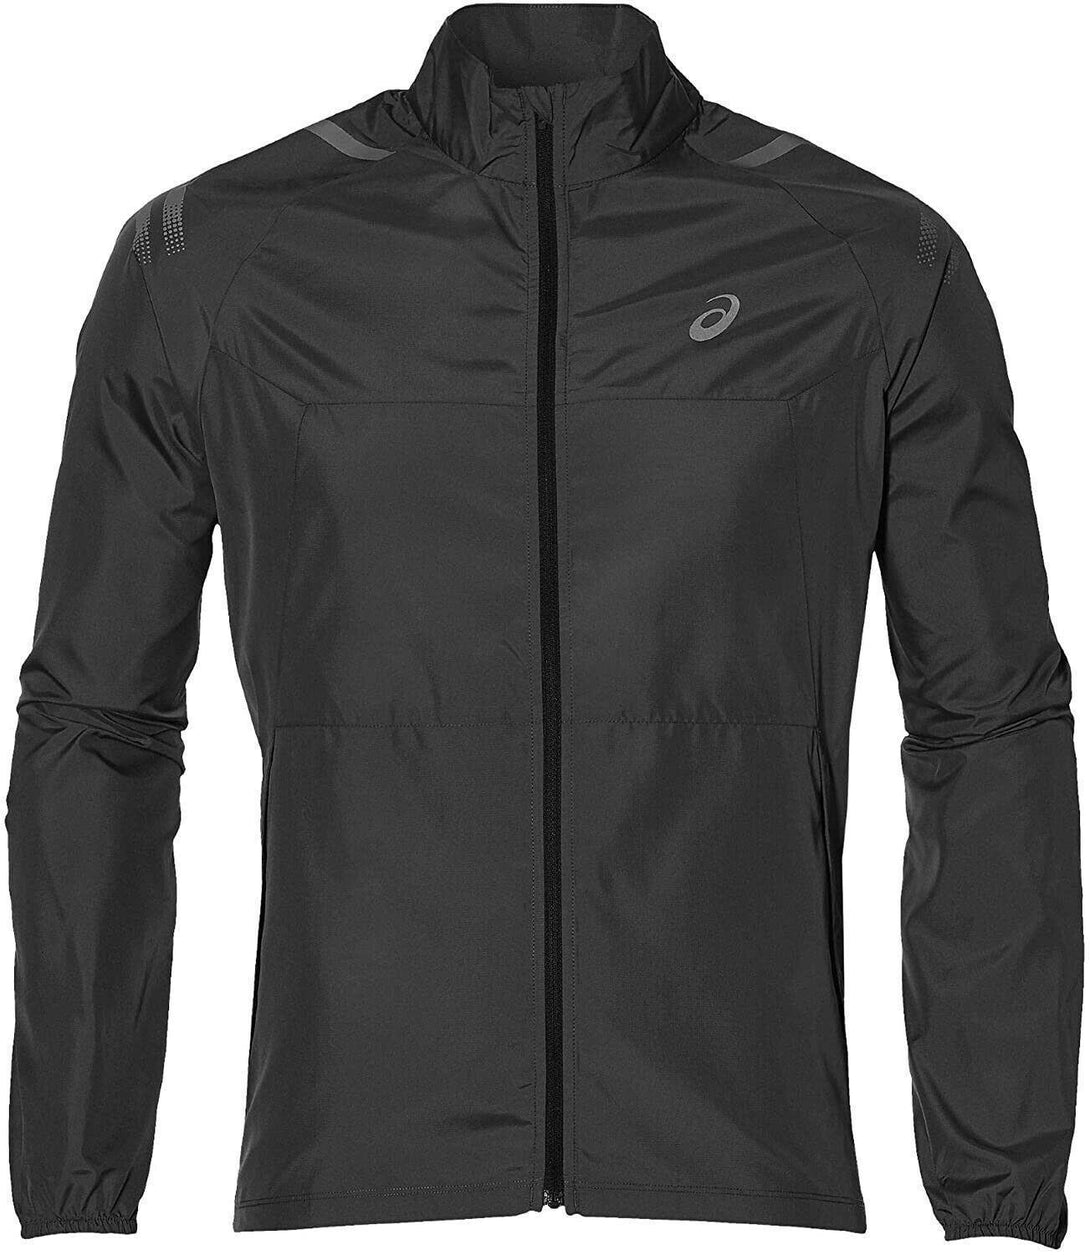 Rugby Heaven Asics Icon Jacket Adults - www.rugby-heaven.co.uk